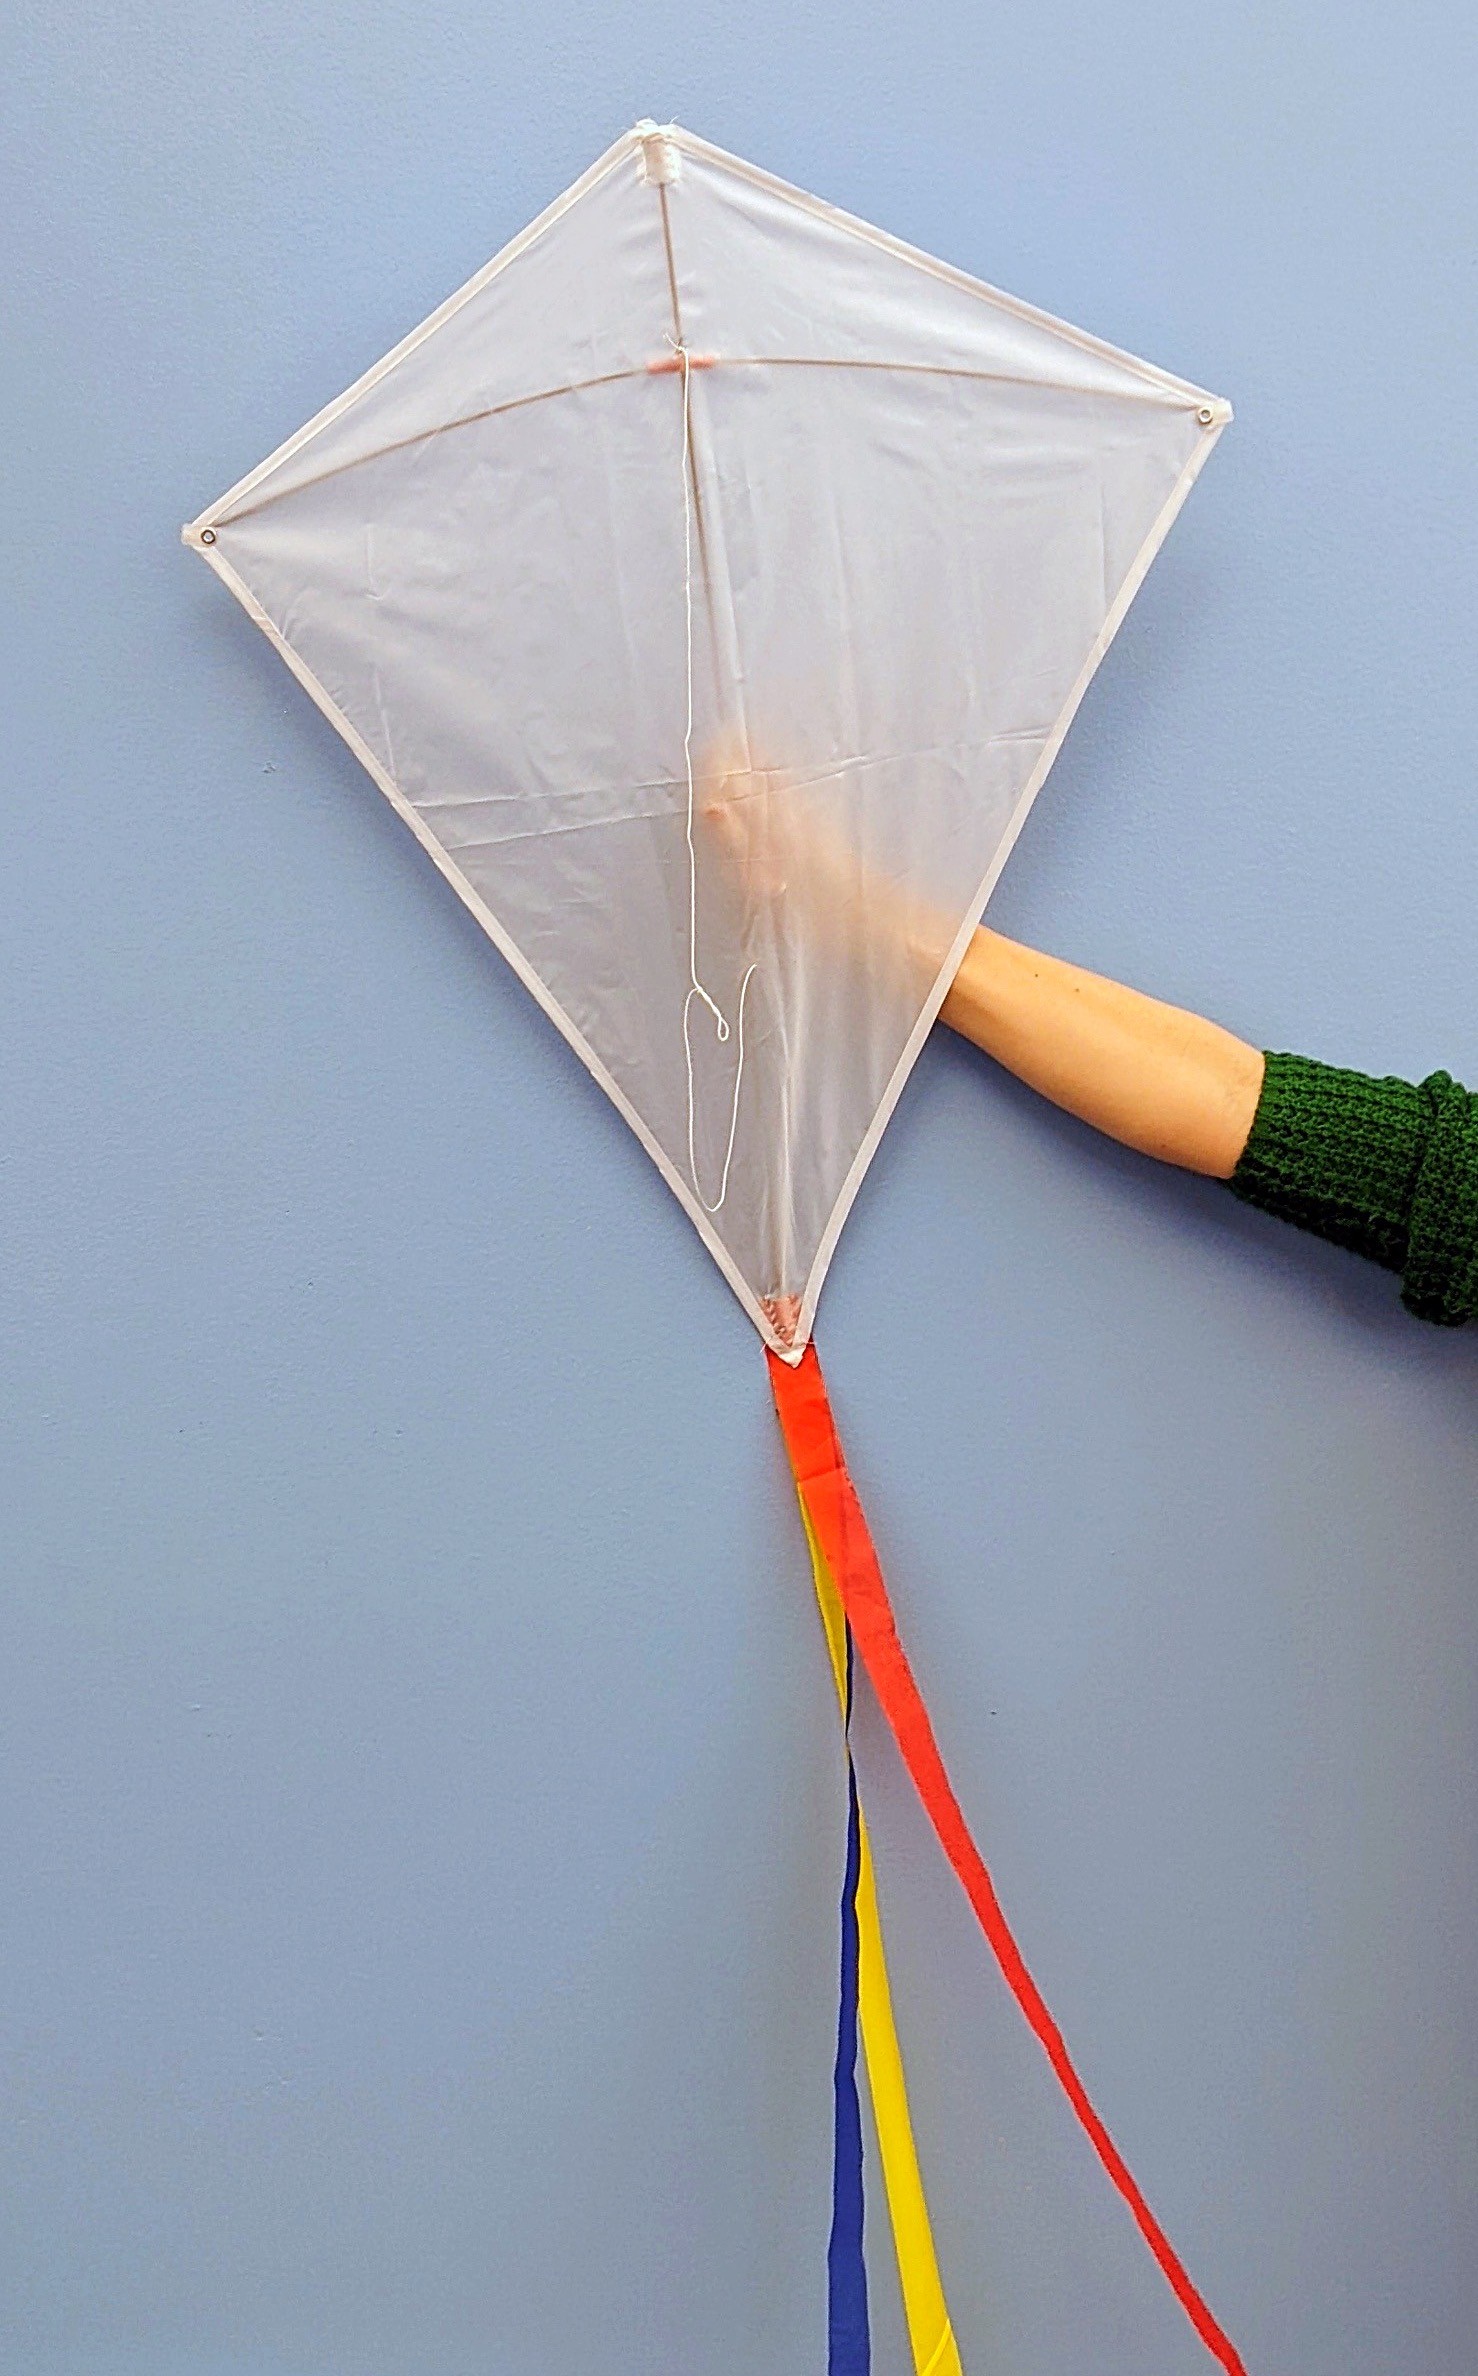 Image of a kite.